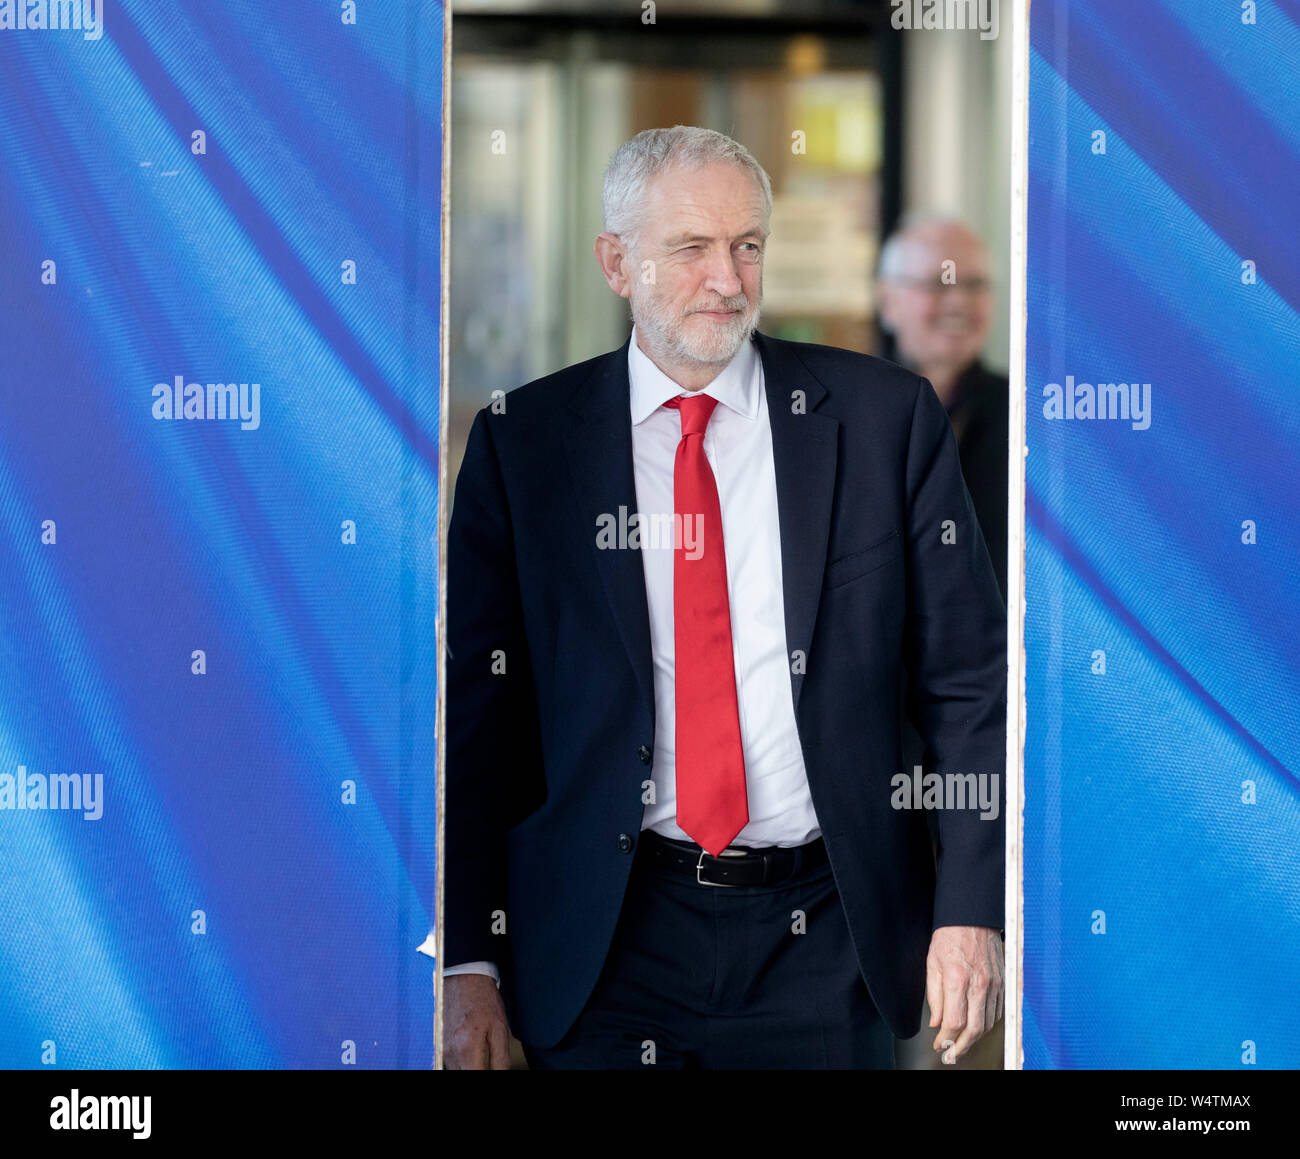 Belgium, Brussels, on March 21, 2019: Jeremy Corbyn, Leader of the Labour Party, and Sir Keir Starmer attending the European Commission on the Brexit Stock Photo